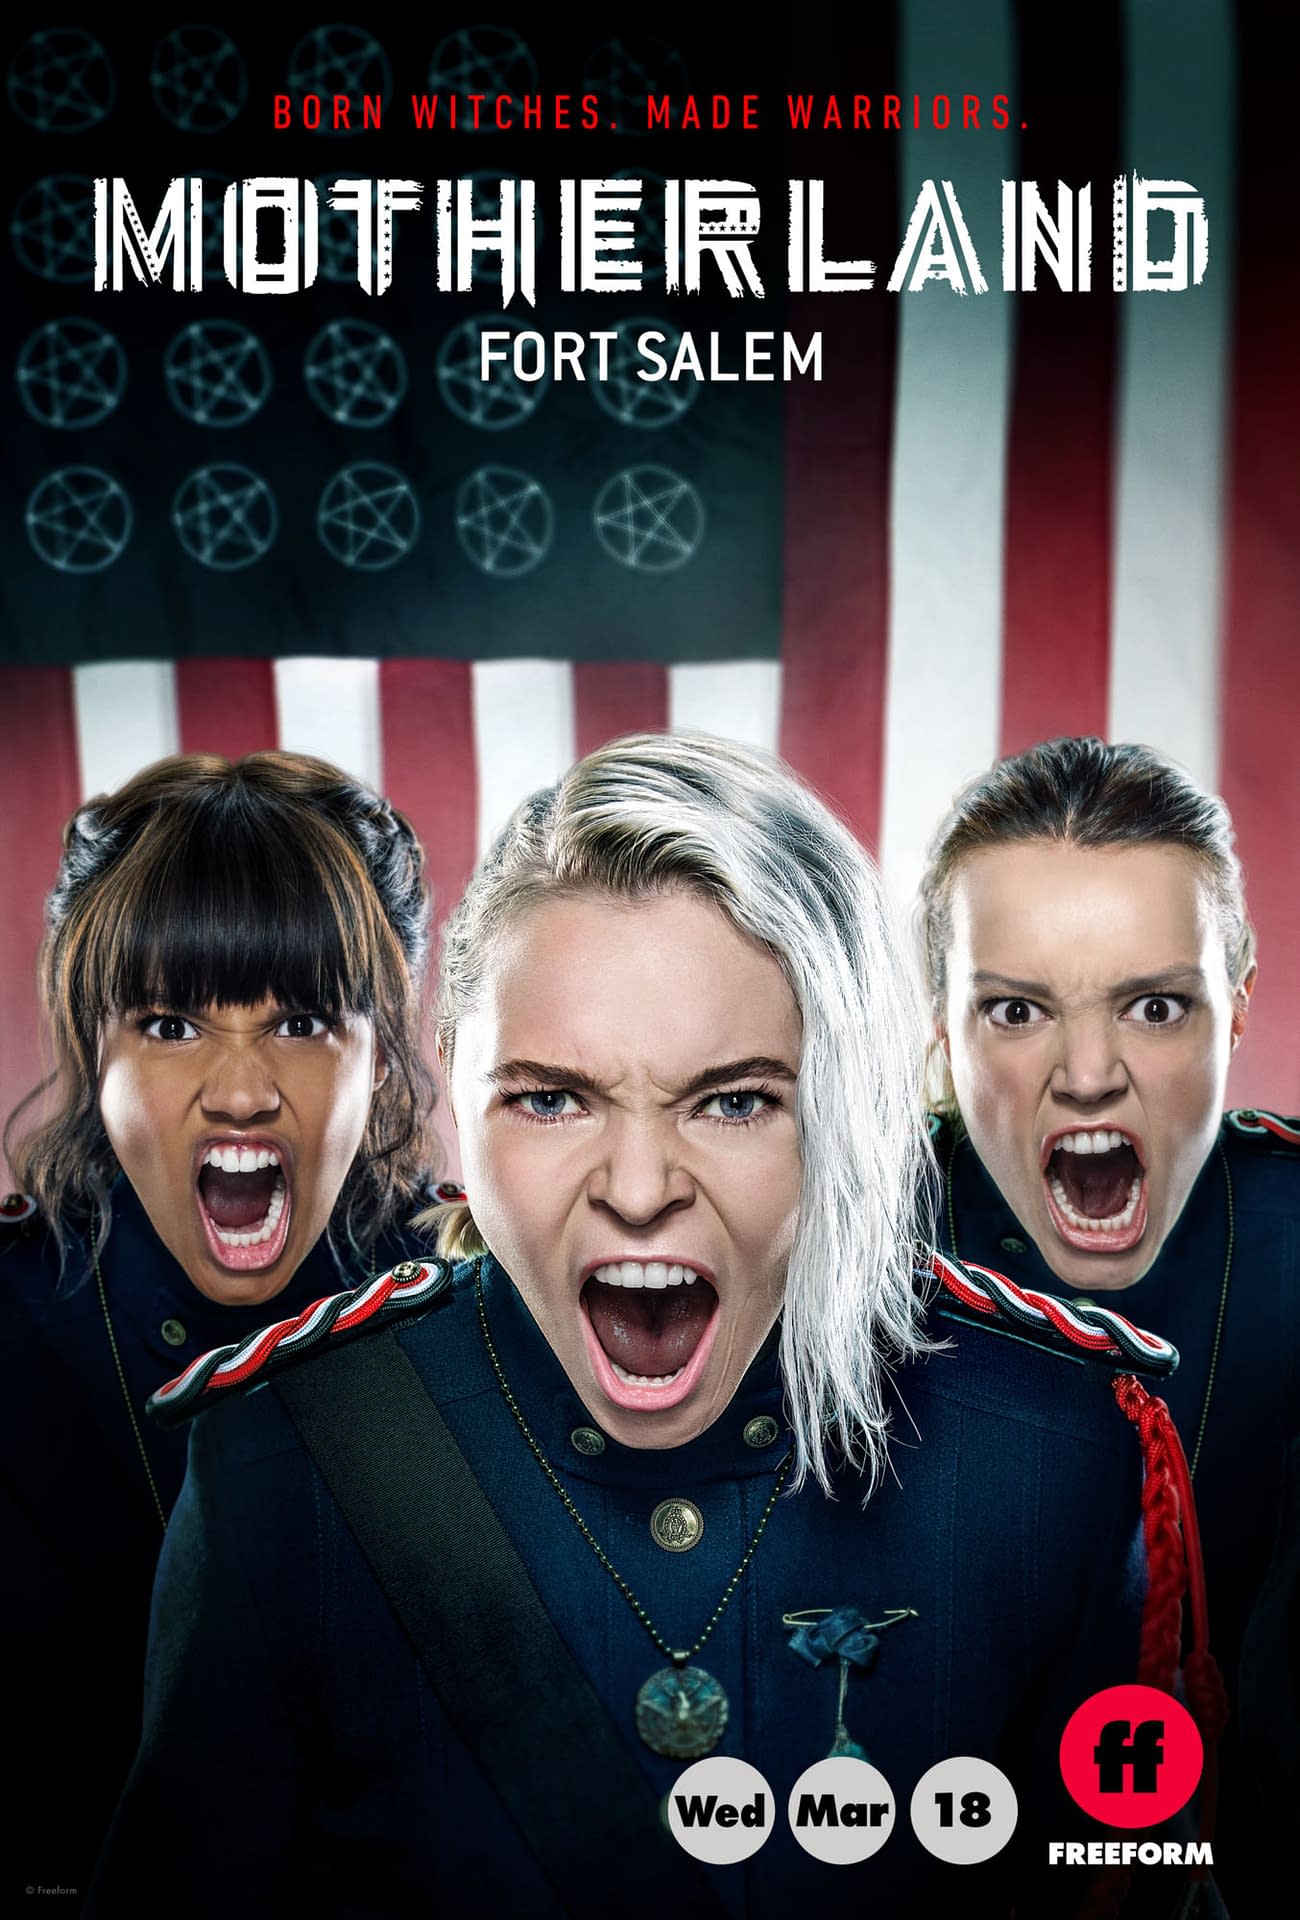 "Motherland: Fort Salem": Born Witches&#8230; Made Warriors&#8230; Called to Greatness [TRAILER]